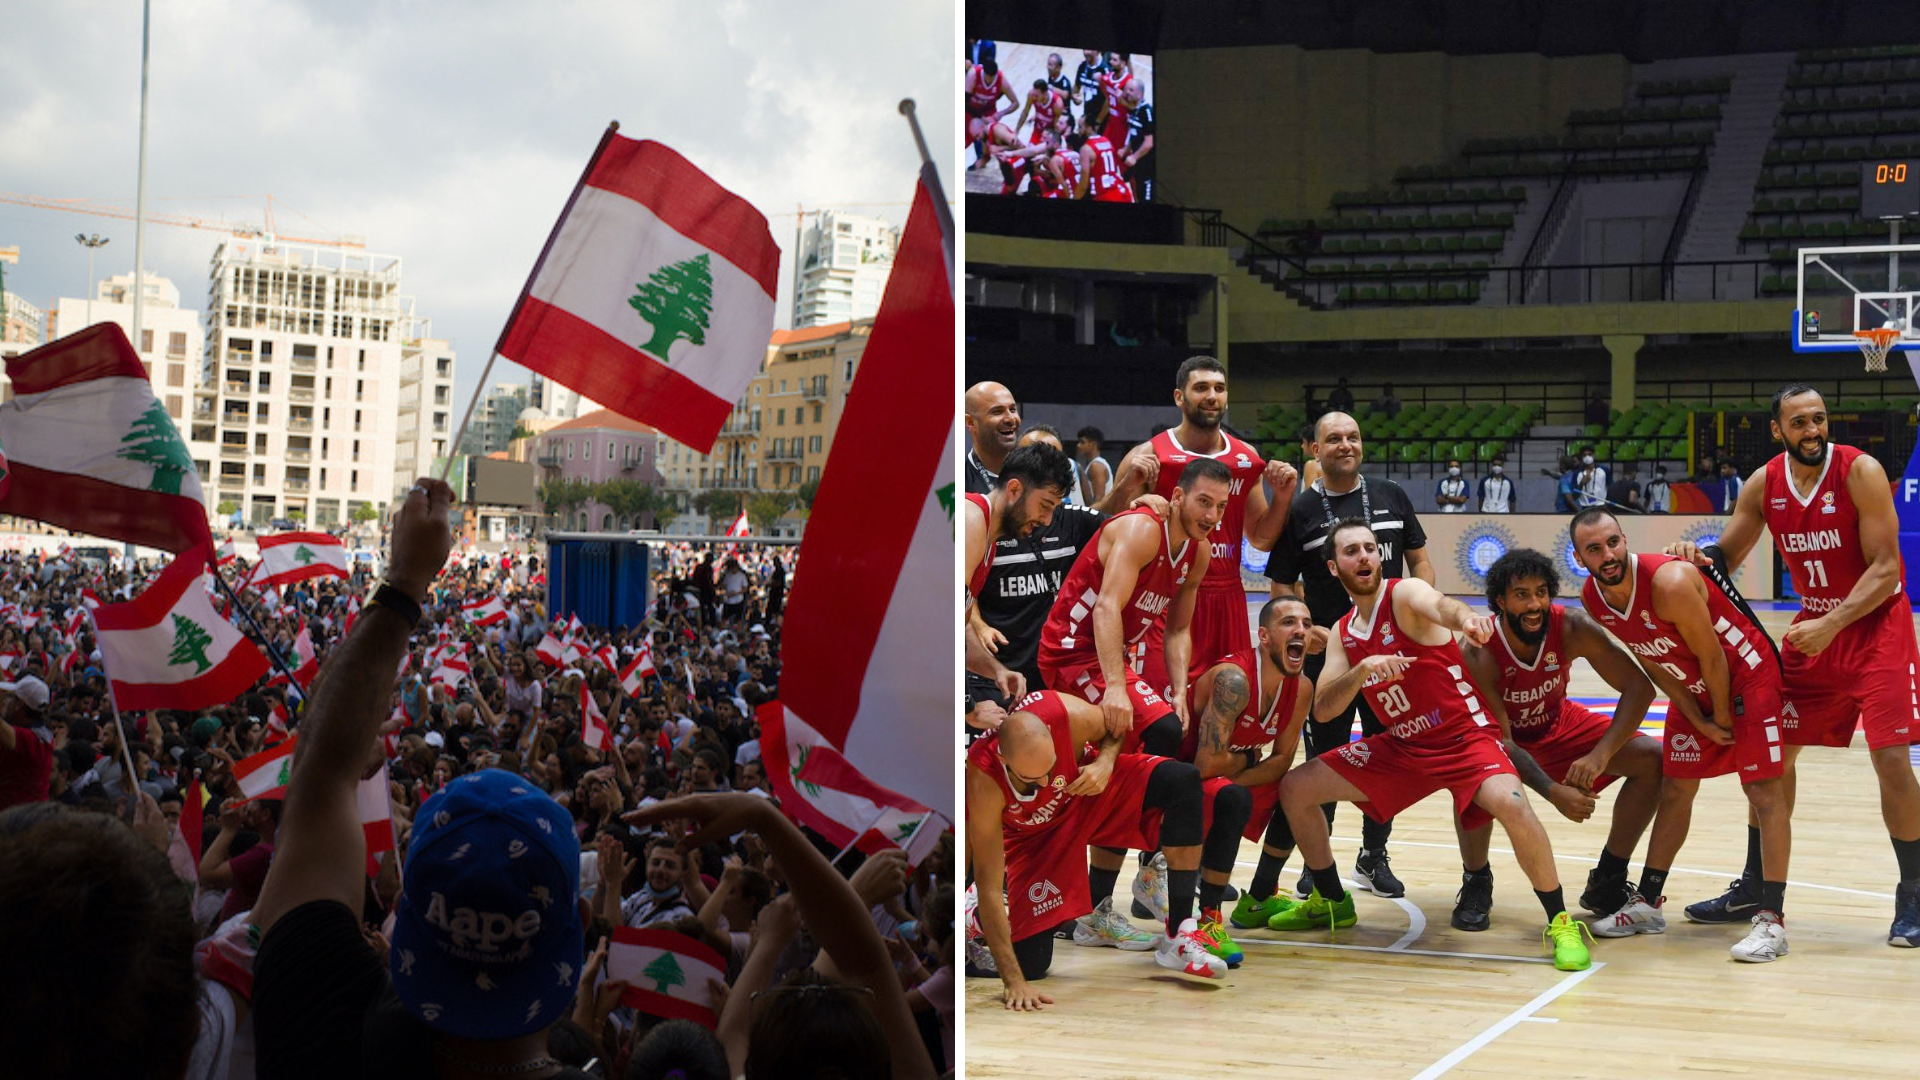 A group of people holding lebanon flag on the left and basketball players on the right